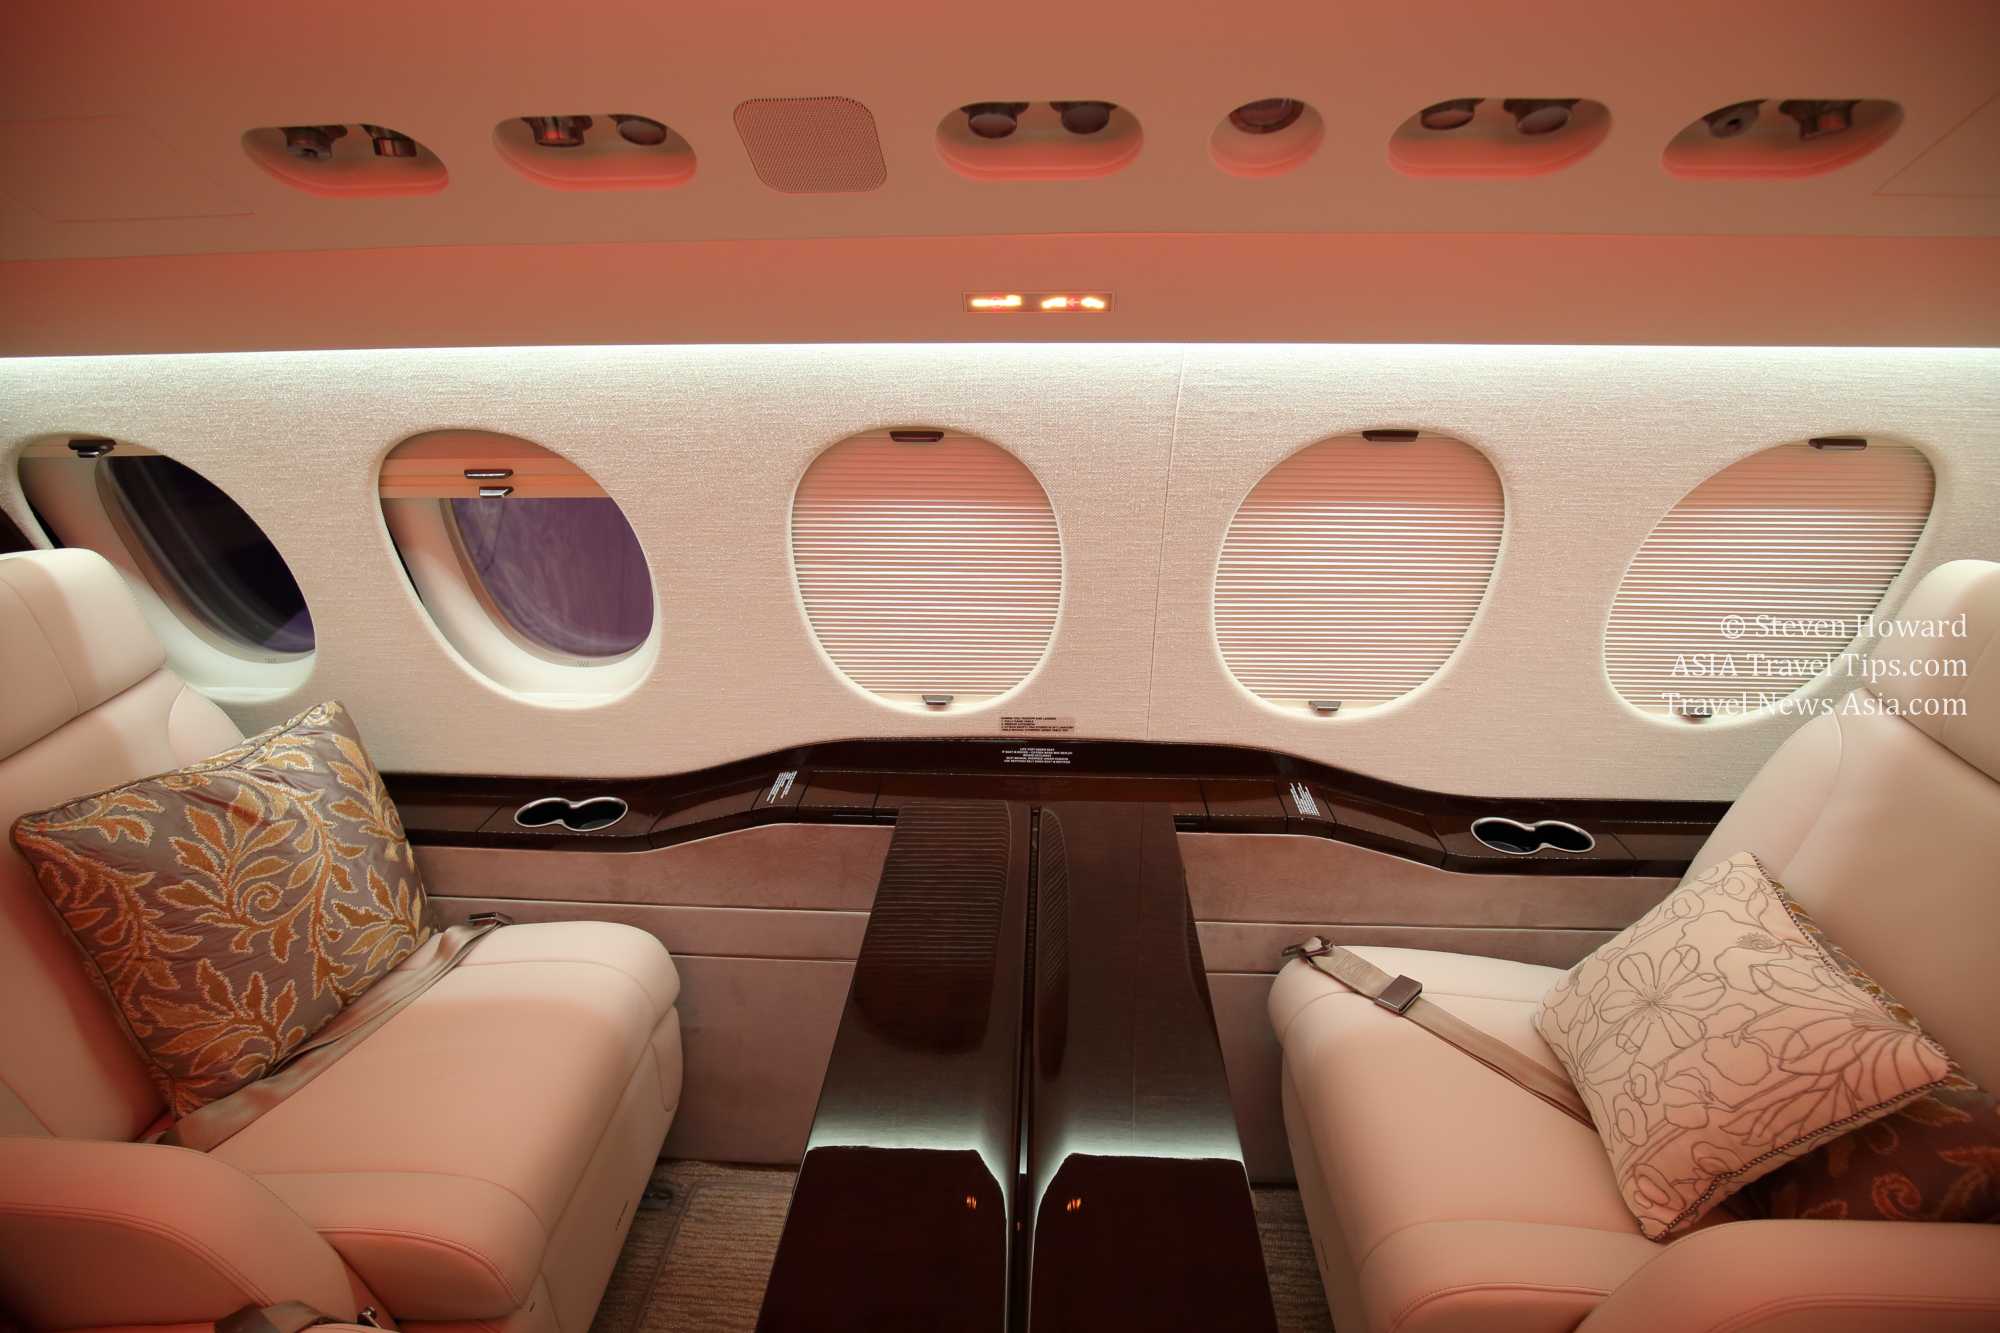 Luxurious cabin of a Dassault Falcon 8X. Picture by Steven Howard of TravelNewsAsia.com Click to enlarge.